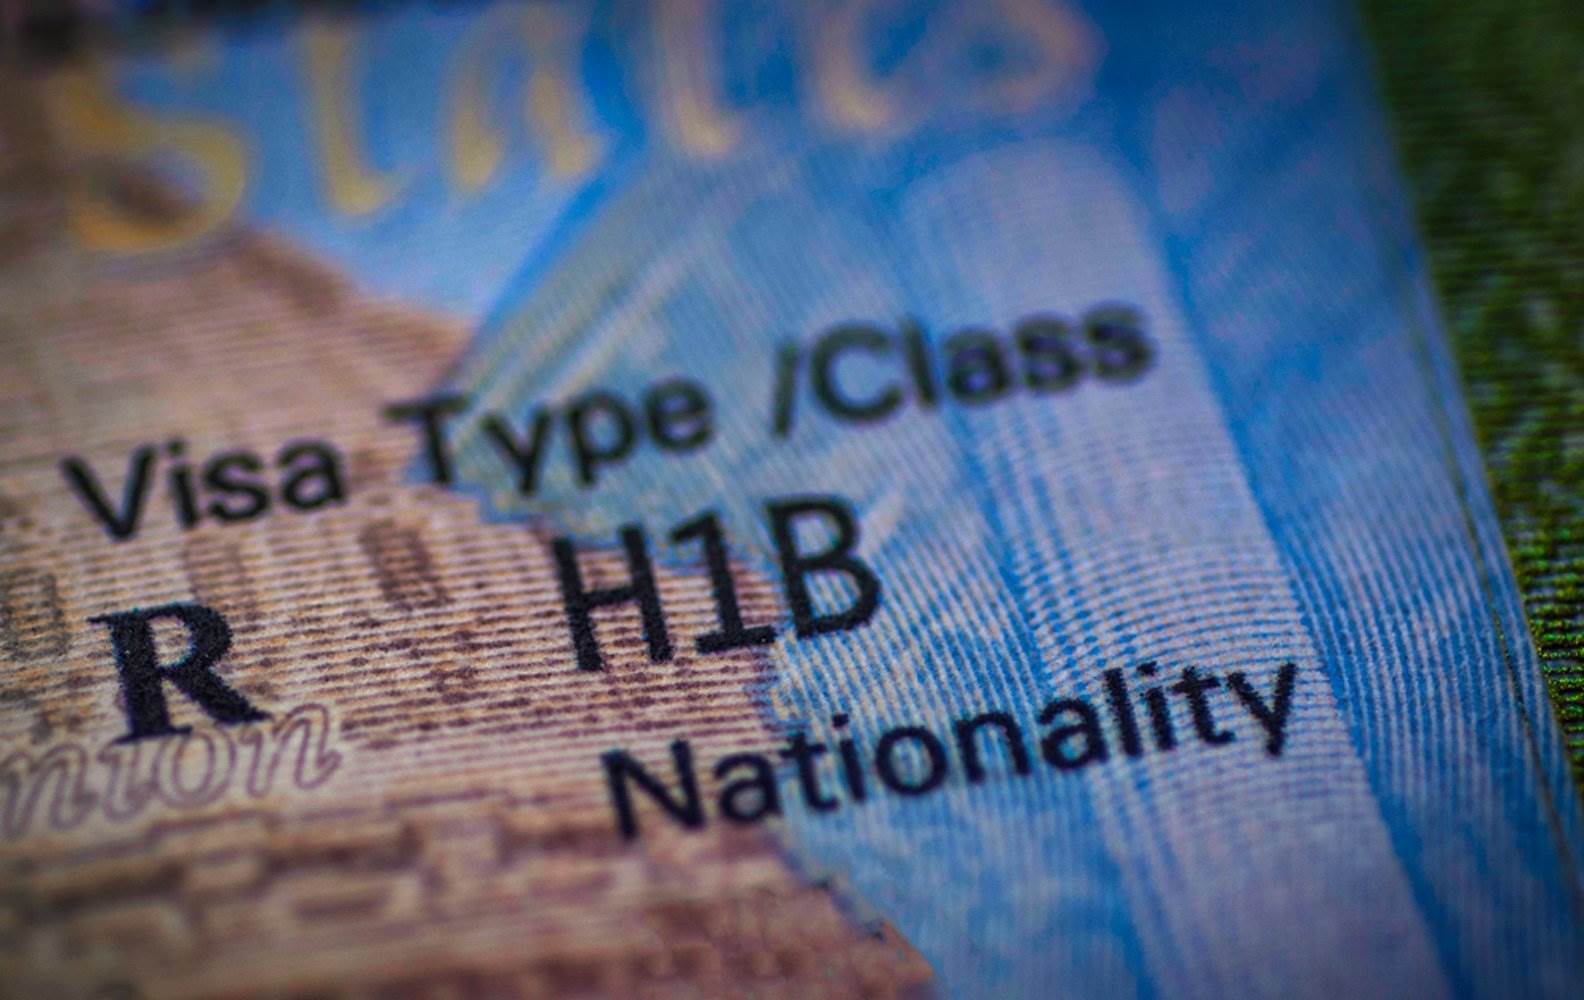 A close-up of the visa type section on the passport identification page showing H1B status.